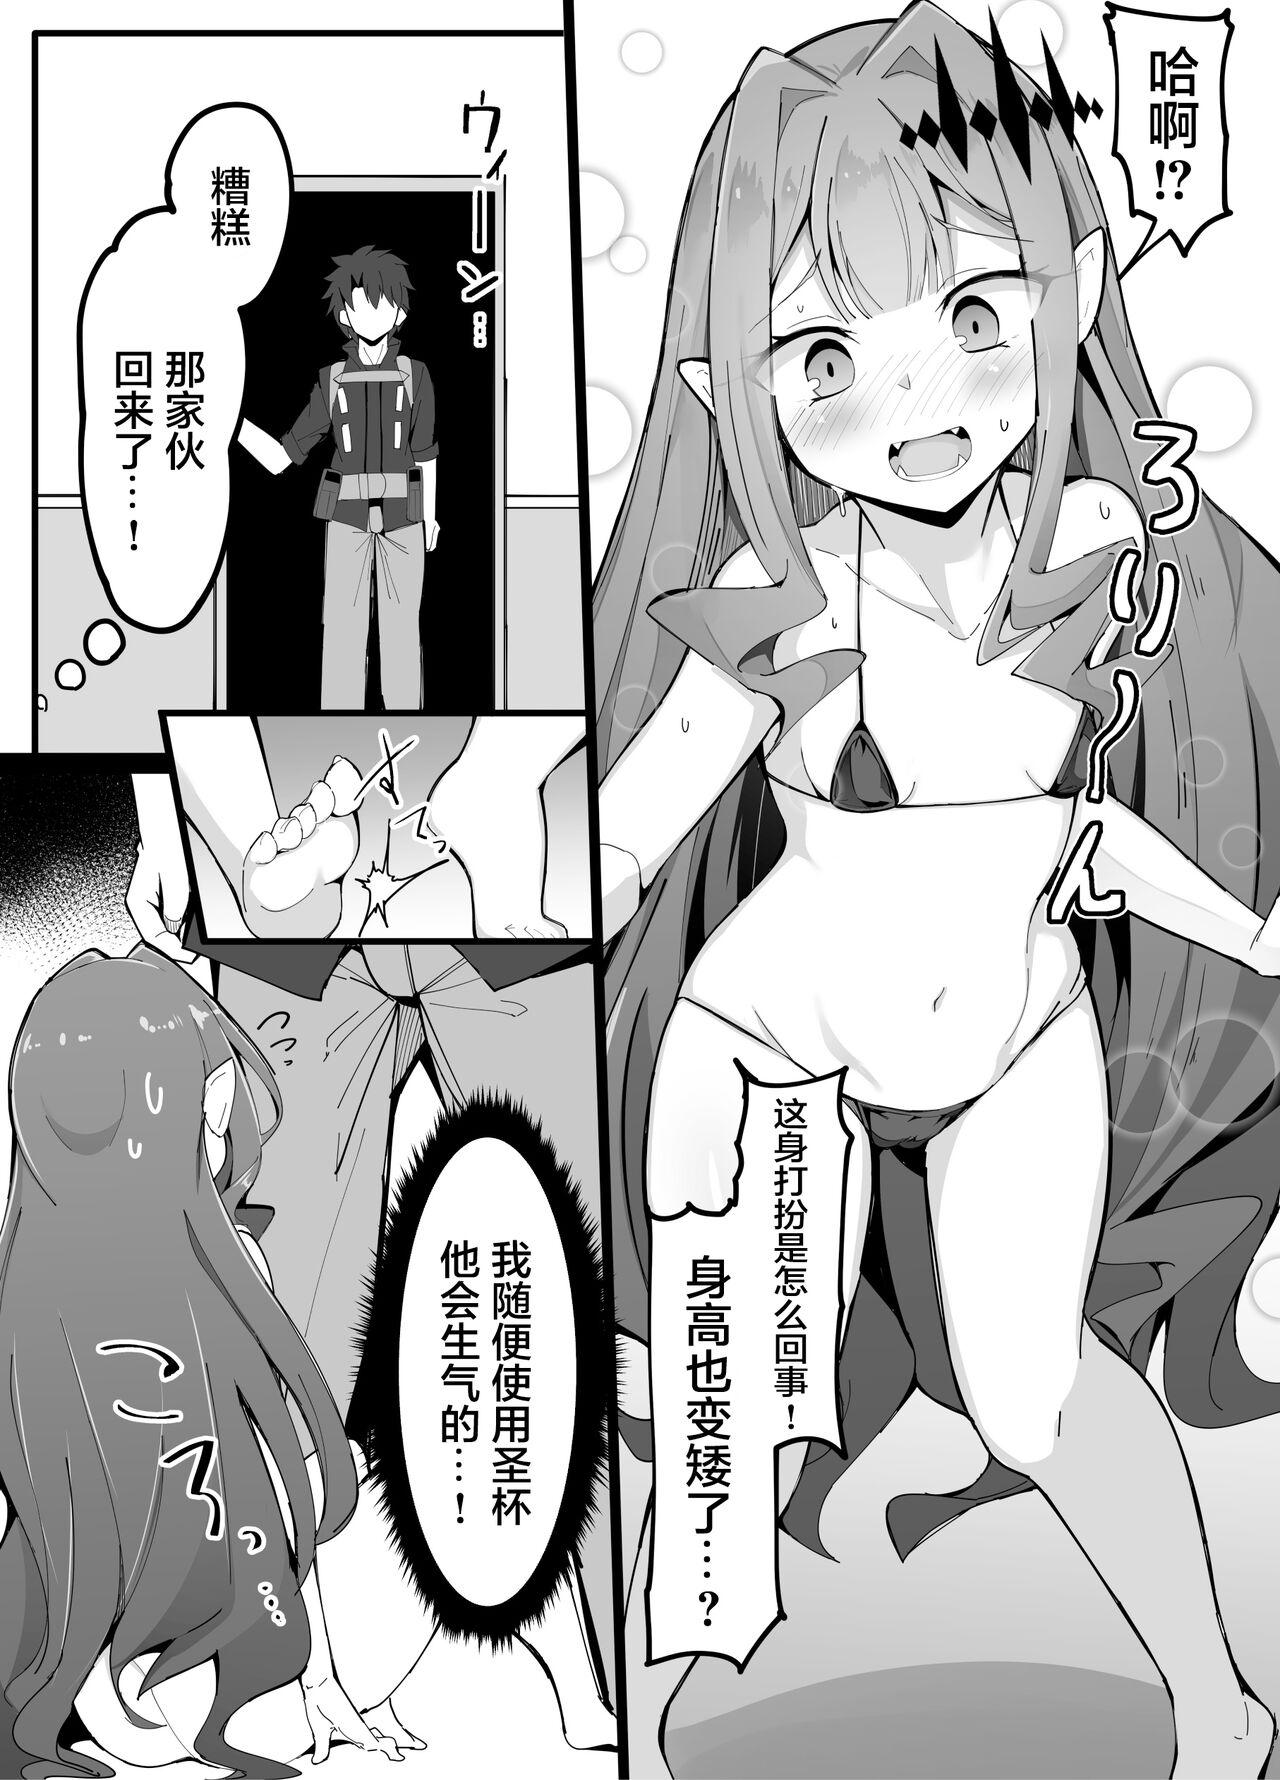 Big Dick 幼精騎士ロリスタン - Fate grand order Real Amatuer Porn - Page 4